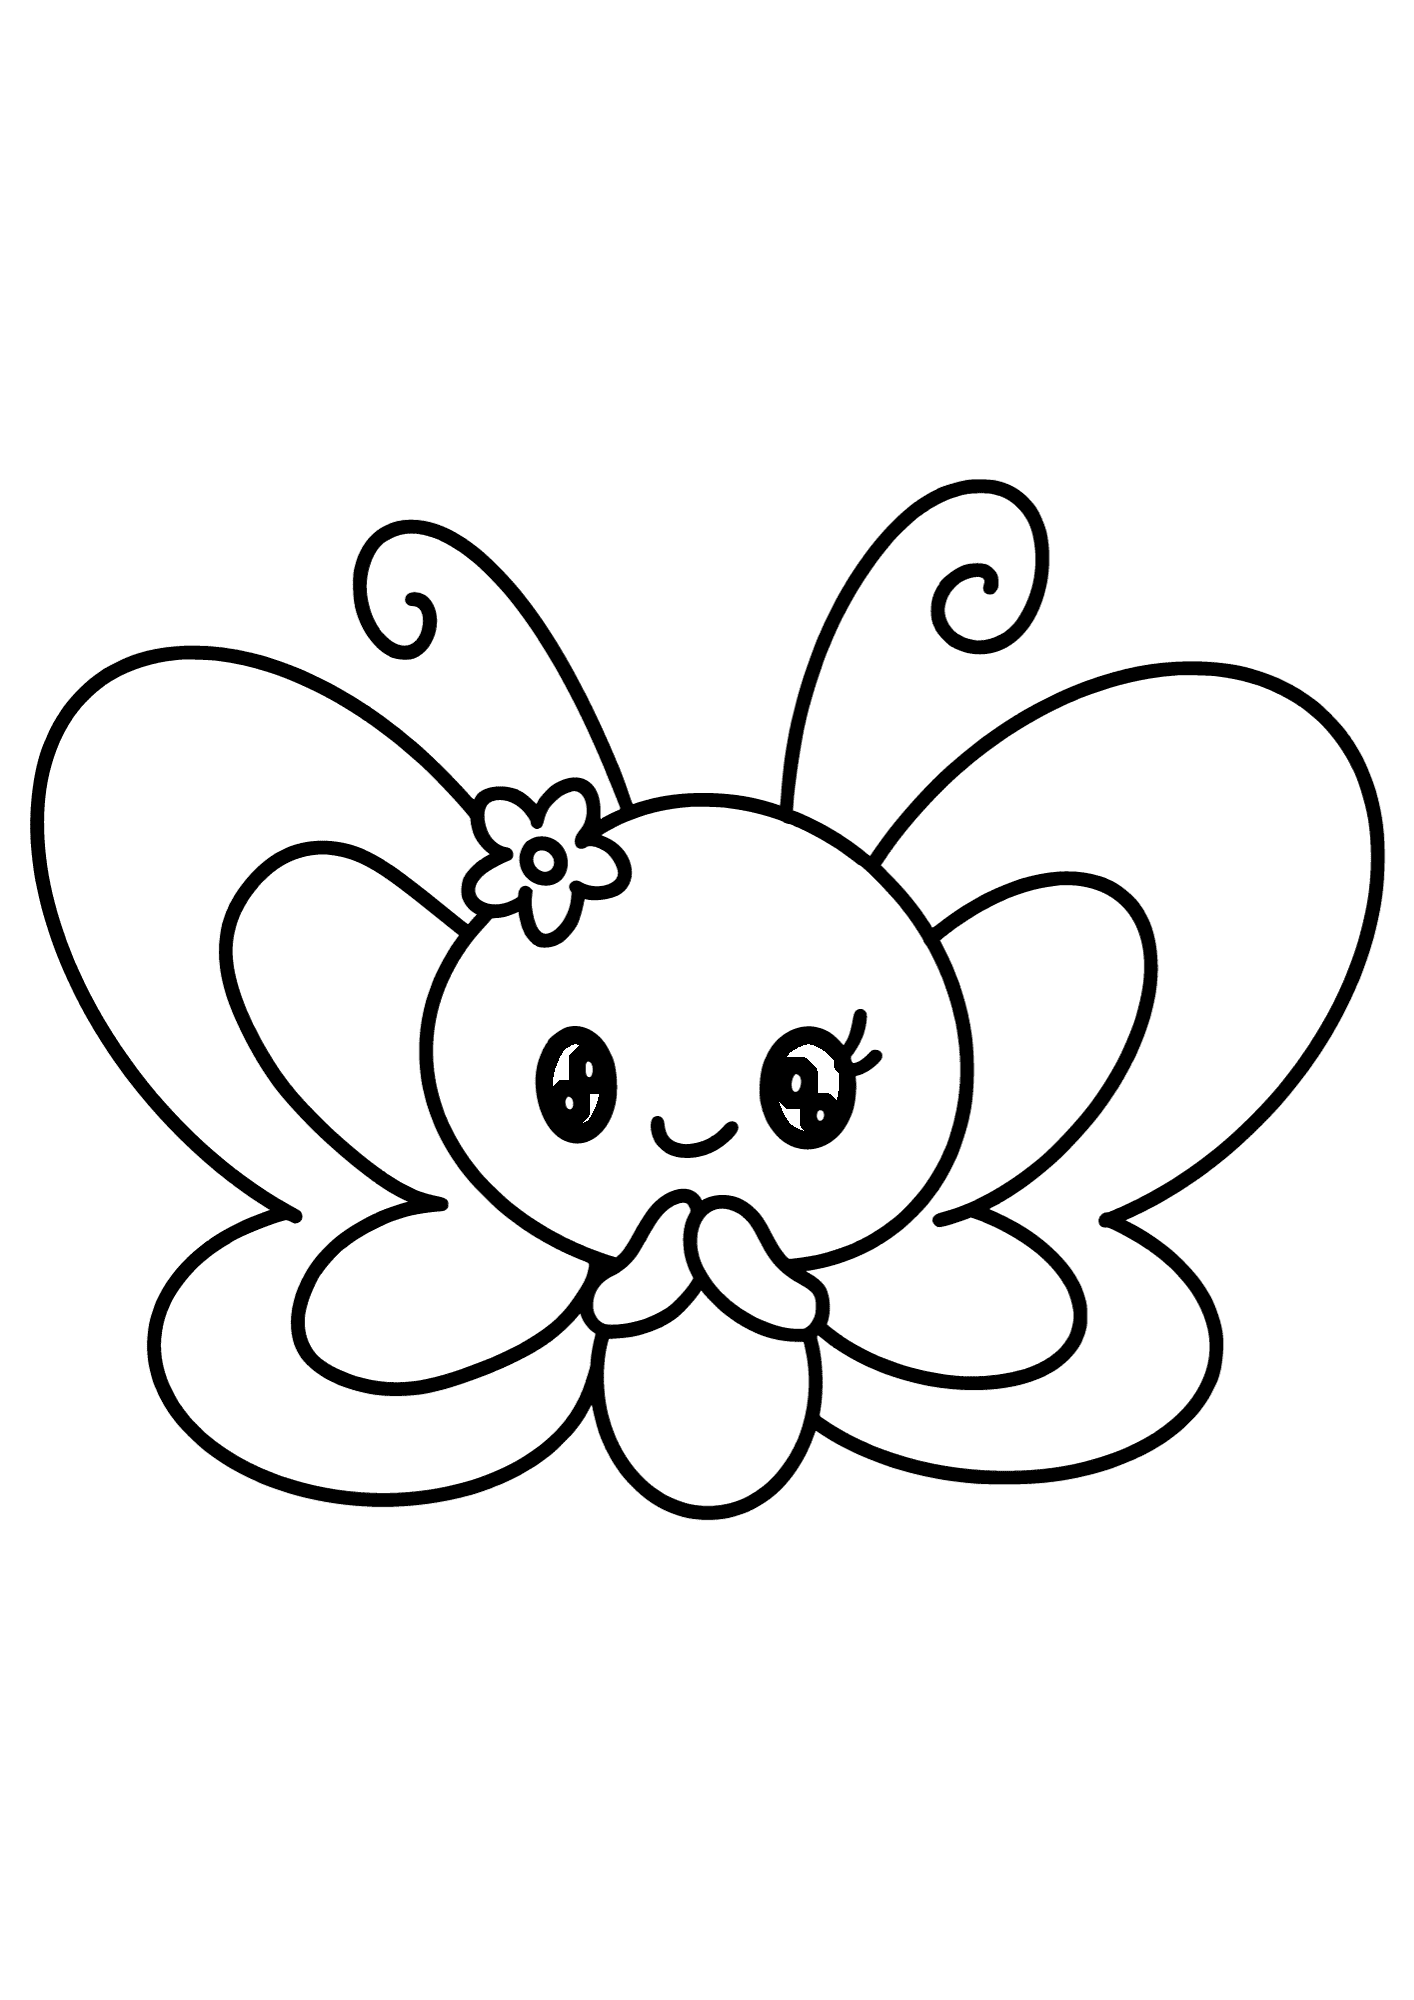 Free Printable Butterflie Coloring Pages